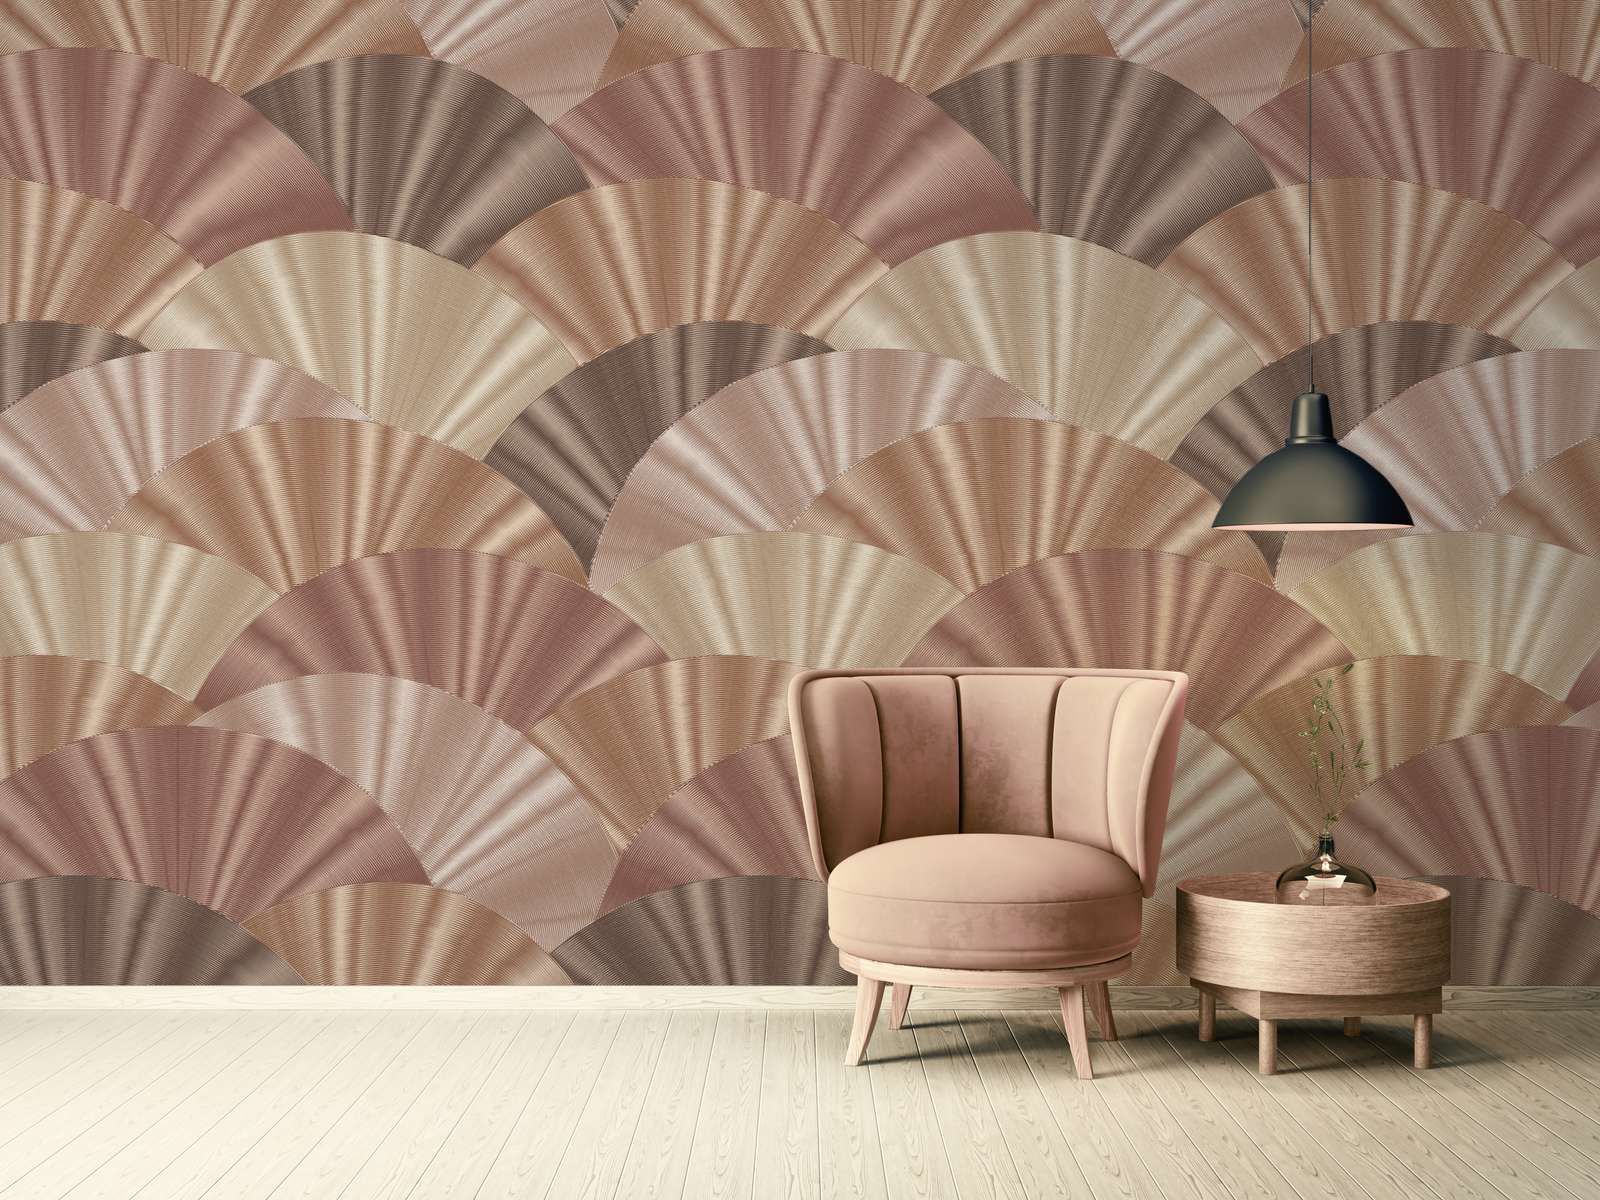             Non-woven wallpaper with fan pattern in soft shades - pink, cream, beige
        